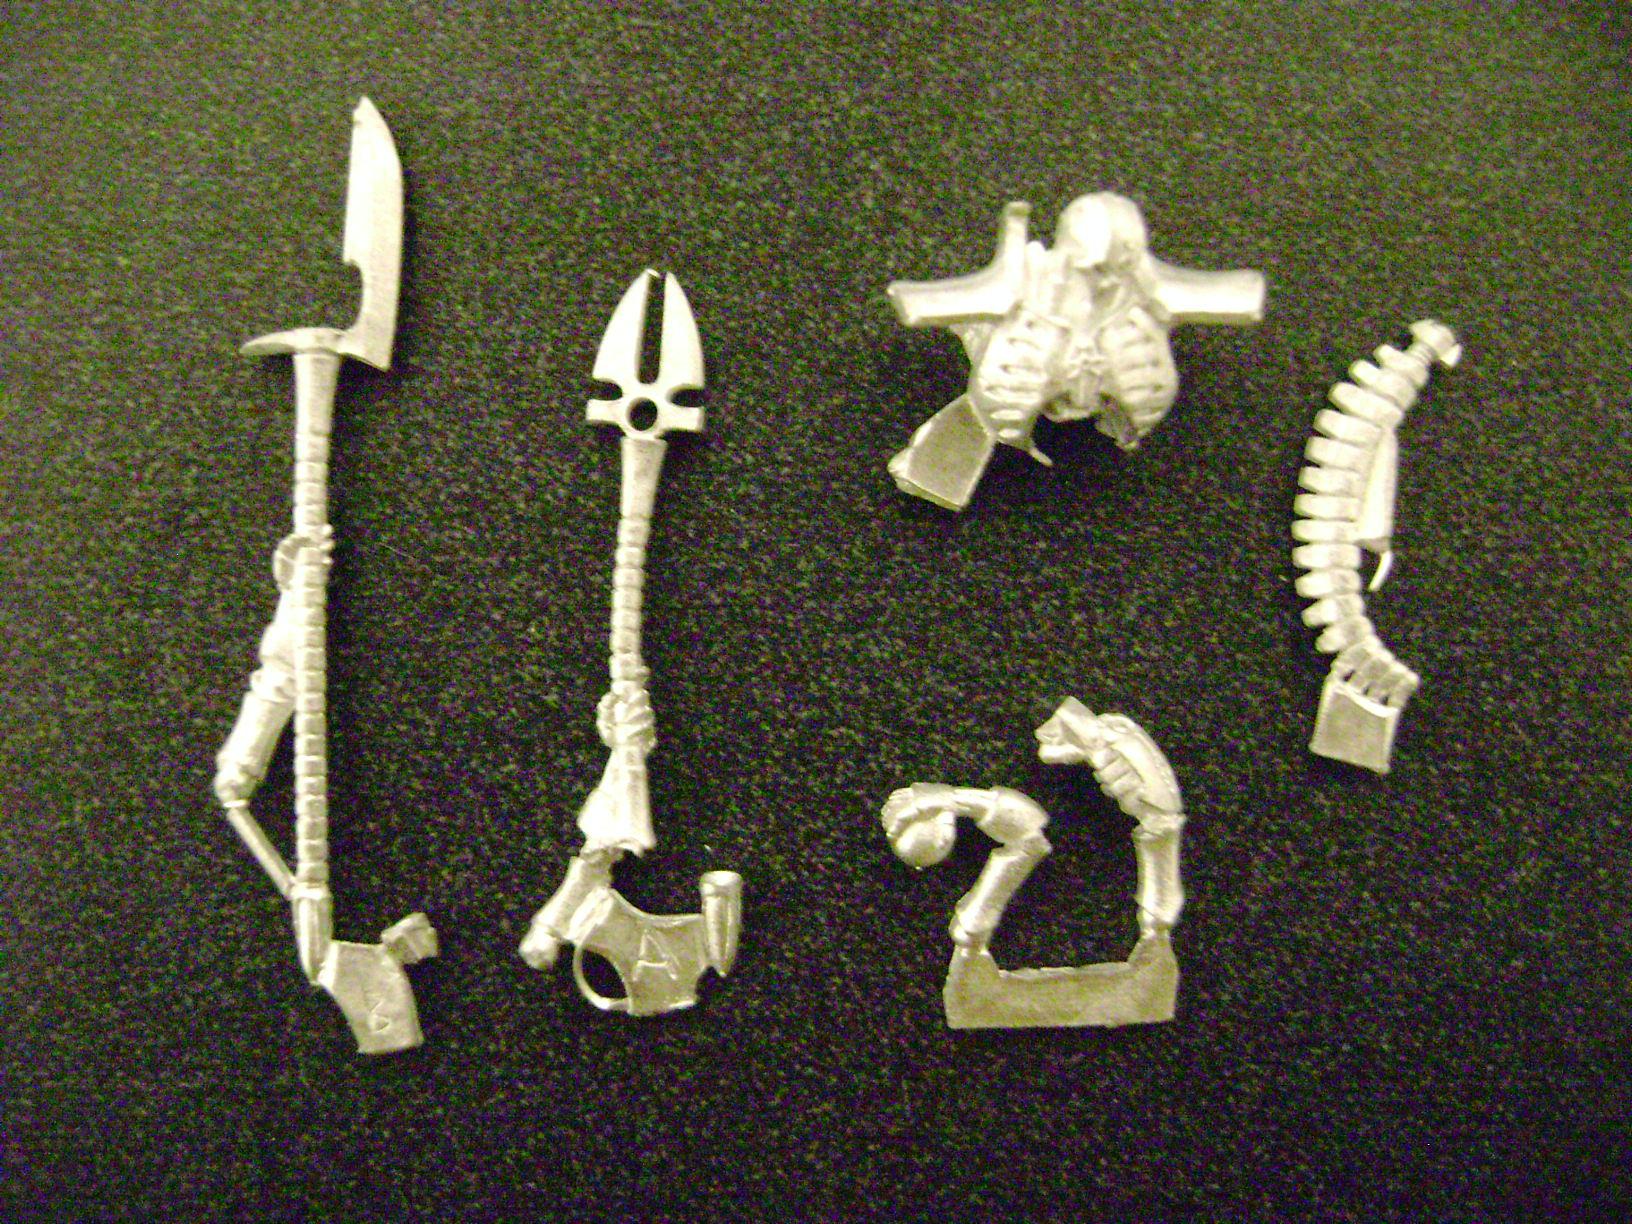 These are the metal bitz that come with the Necron Destroyer Lord box along with the plastic sprue from the Necron Destroyer box. Comes with two choices for weapons and two choices for the arm not wie